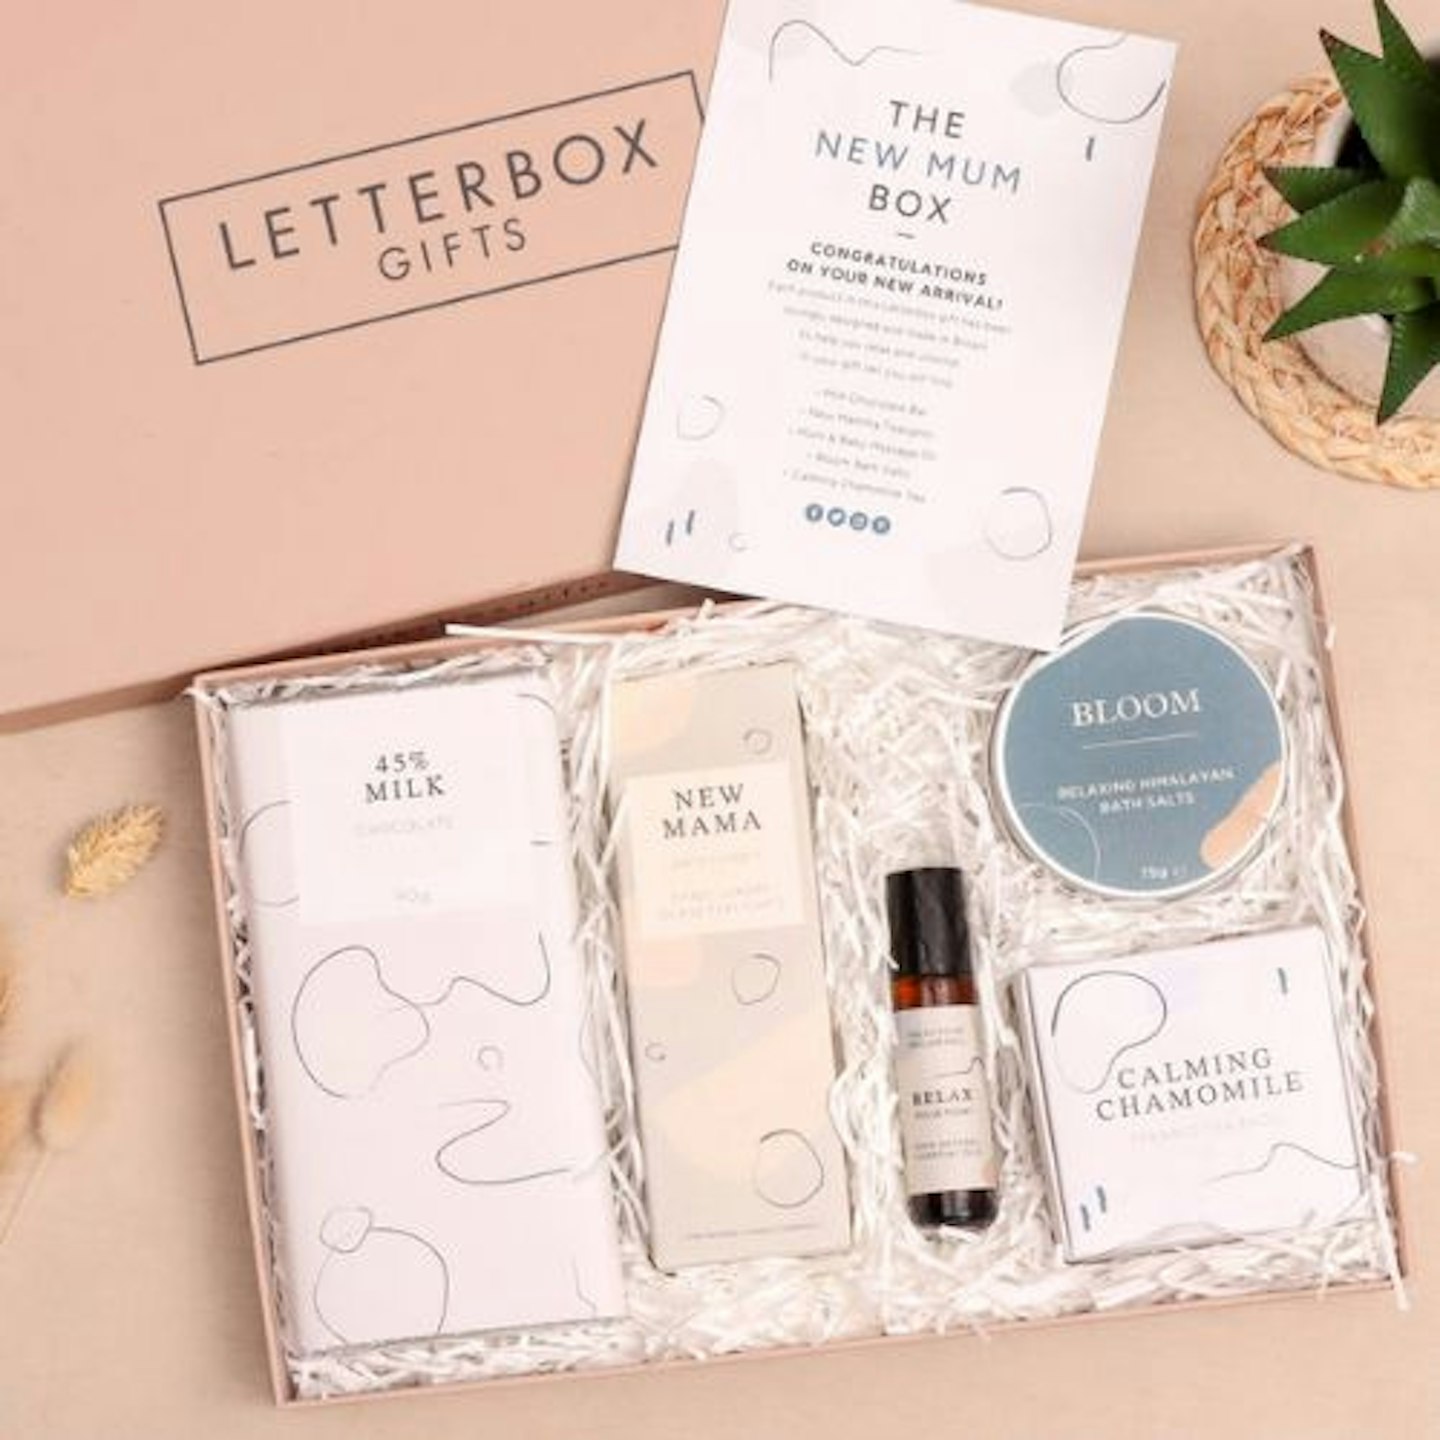 New Mum Self-Care Letterbox Gift